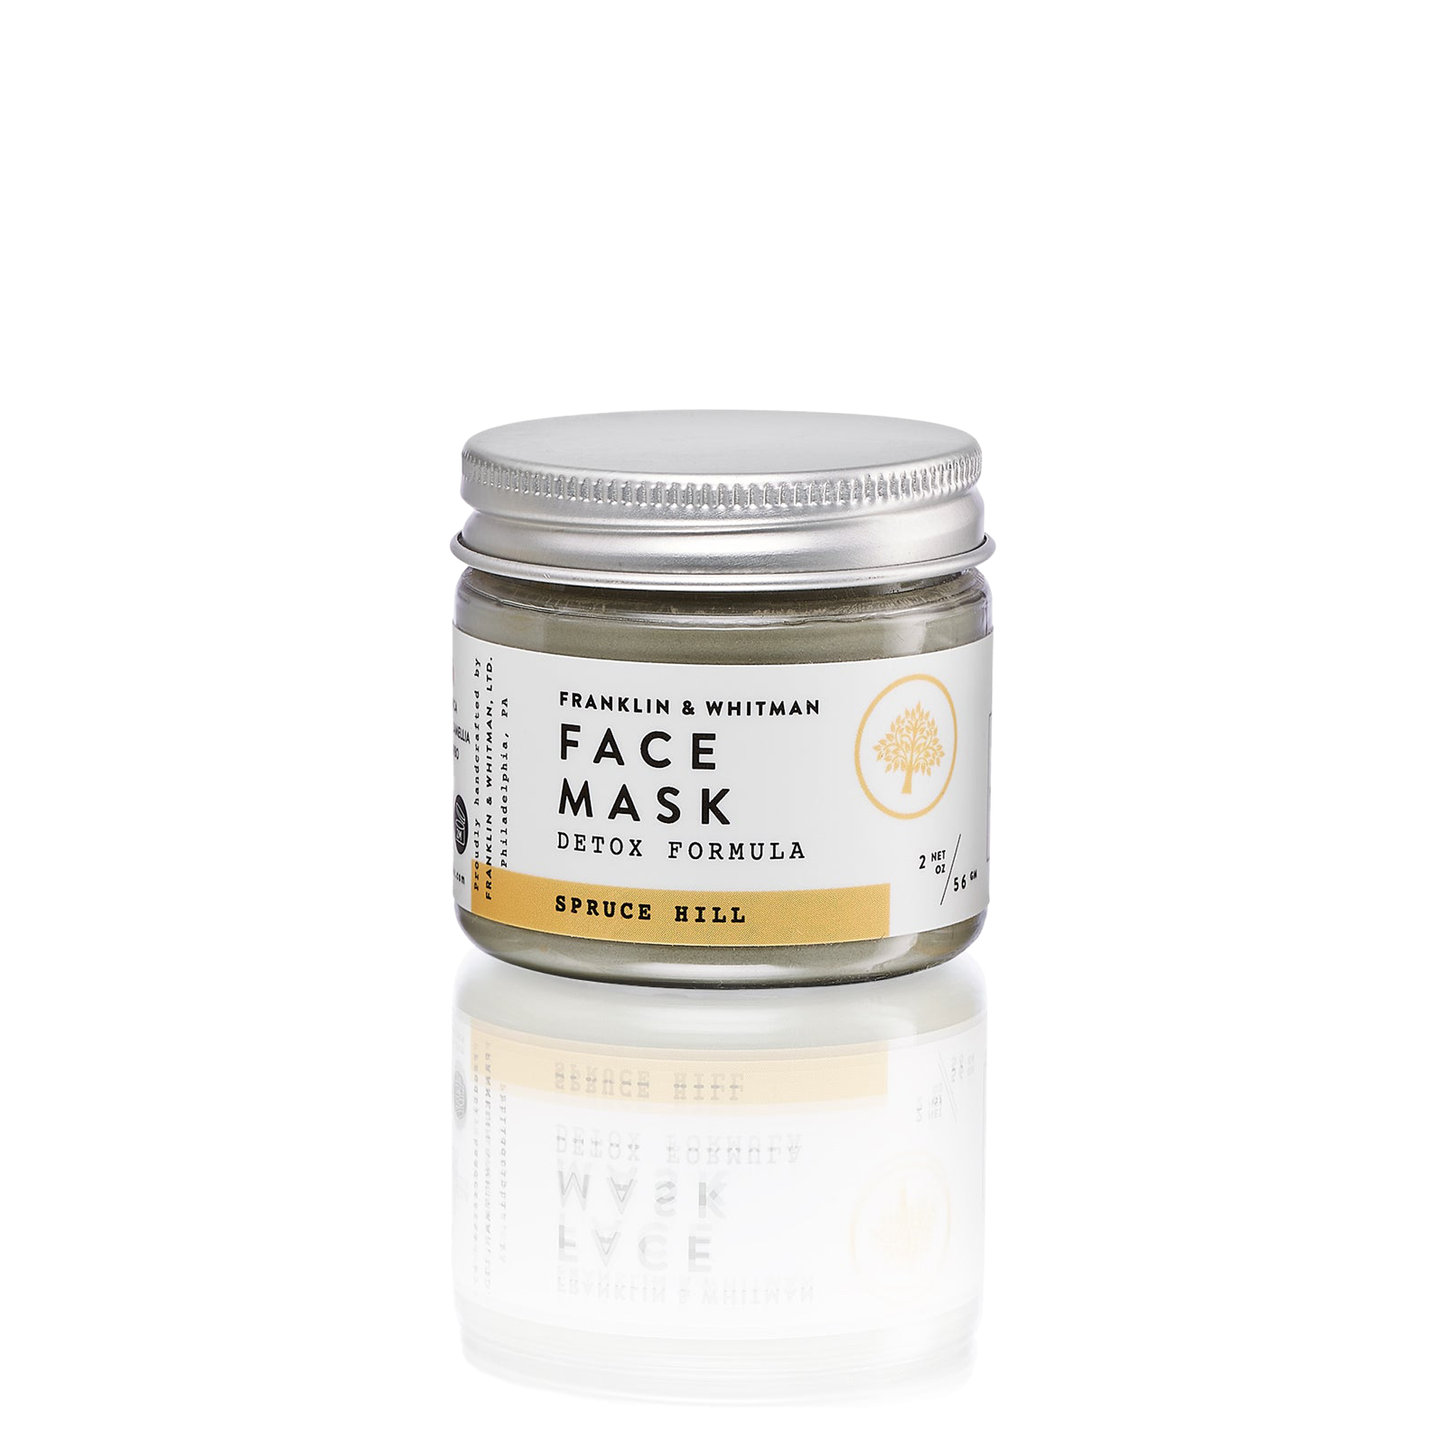 Spruce Hill Clay Mask